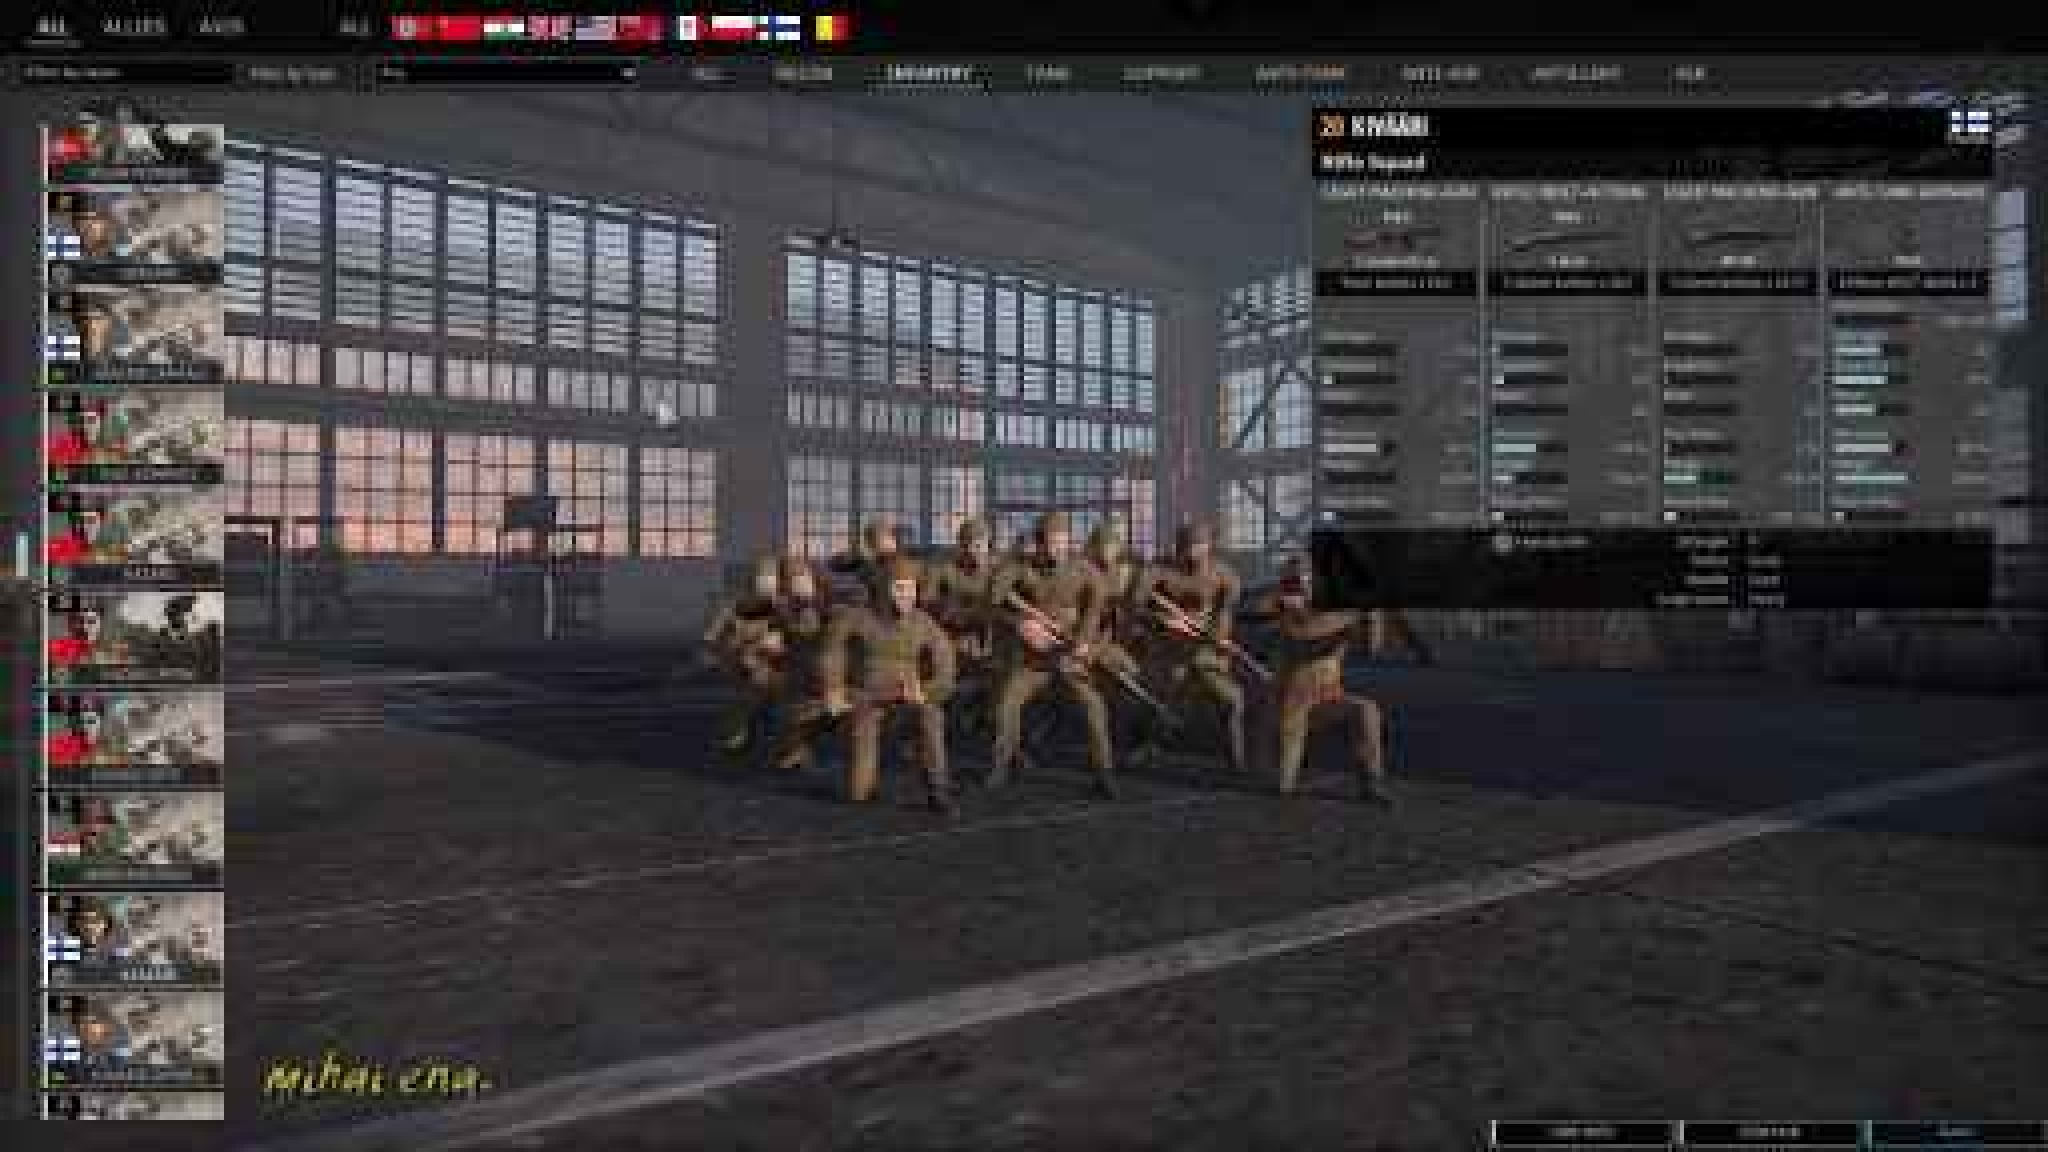 steel division 1944 download free